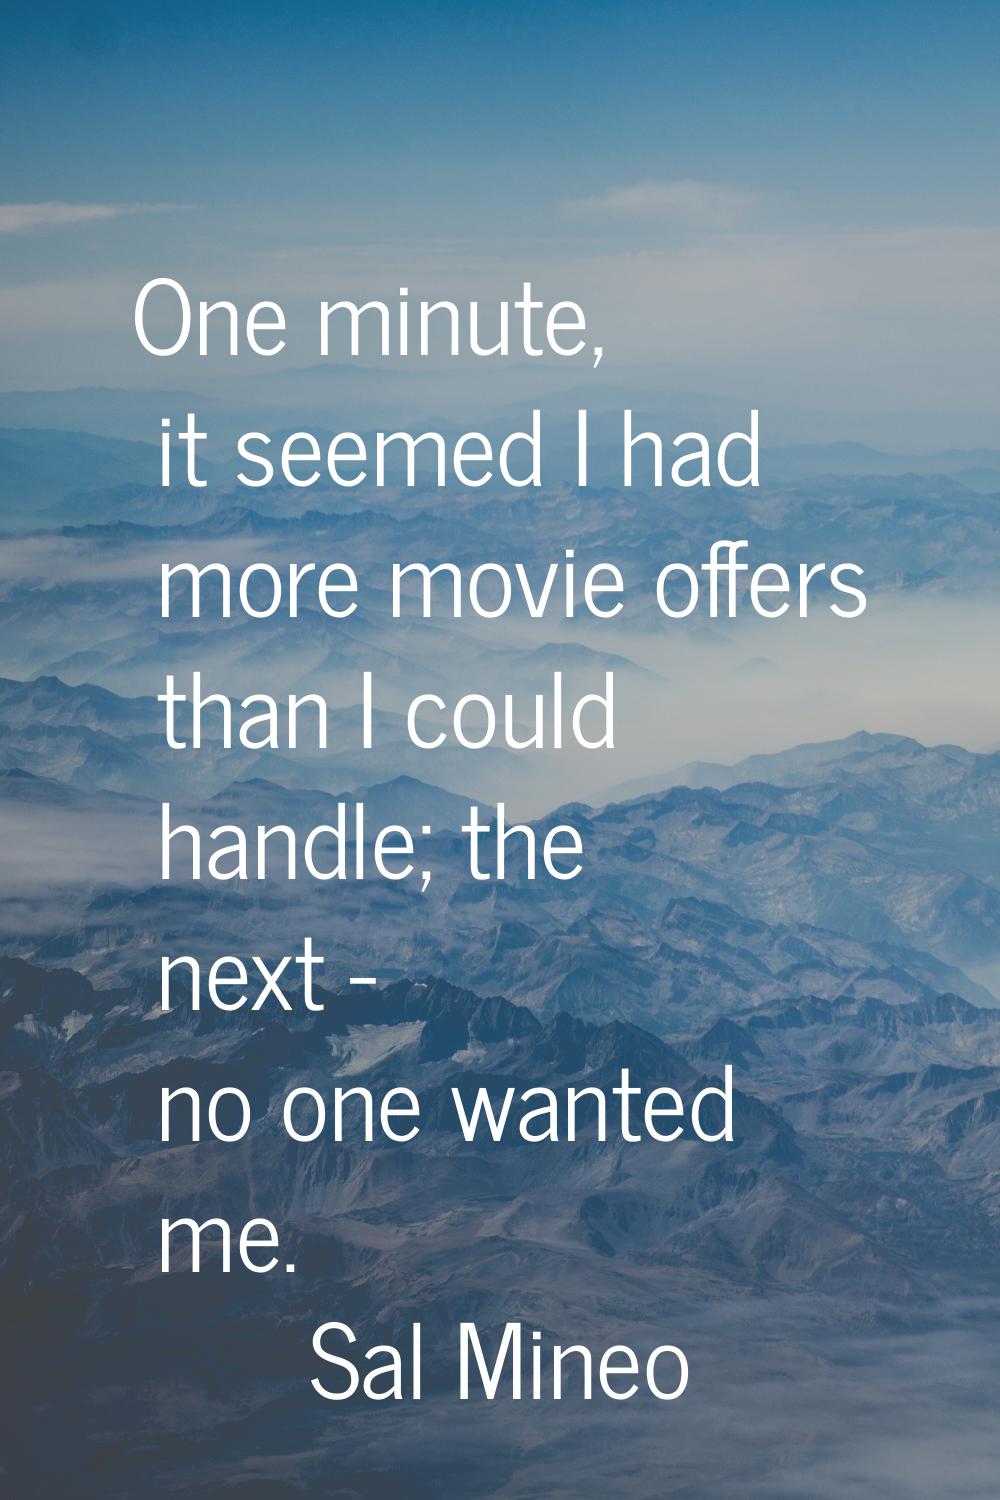 One minute, it seemed I had more movie offers than I could handle; the next - no one wanted me.